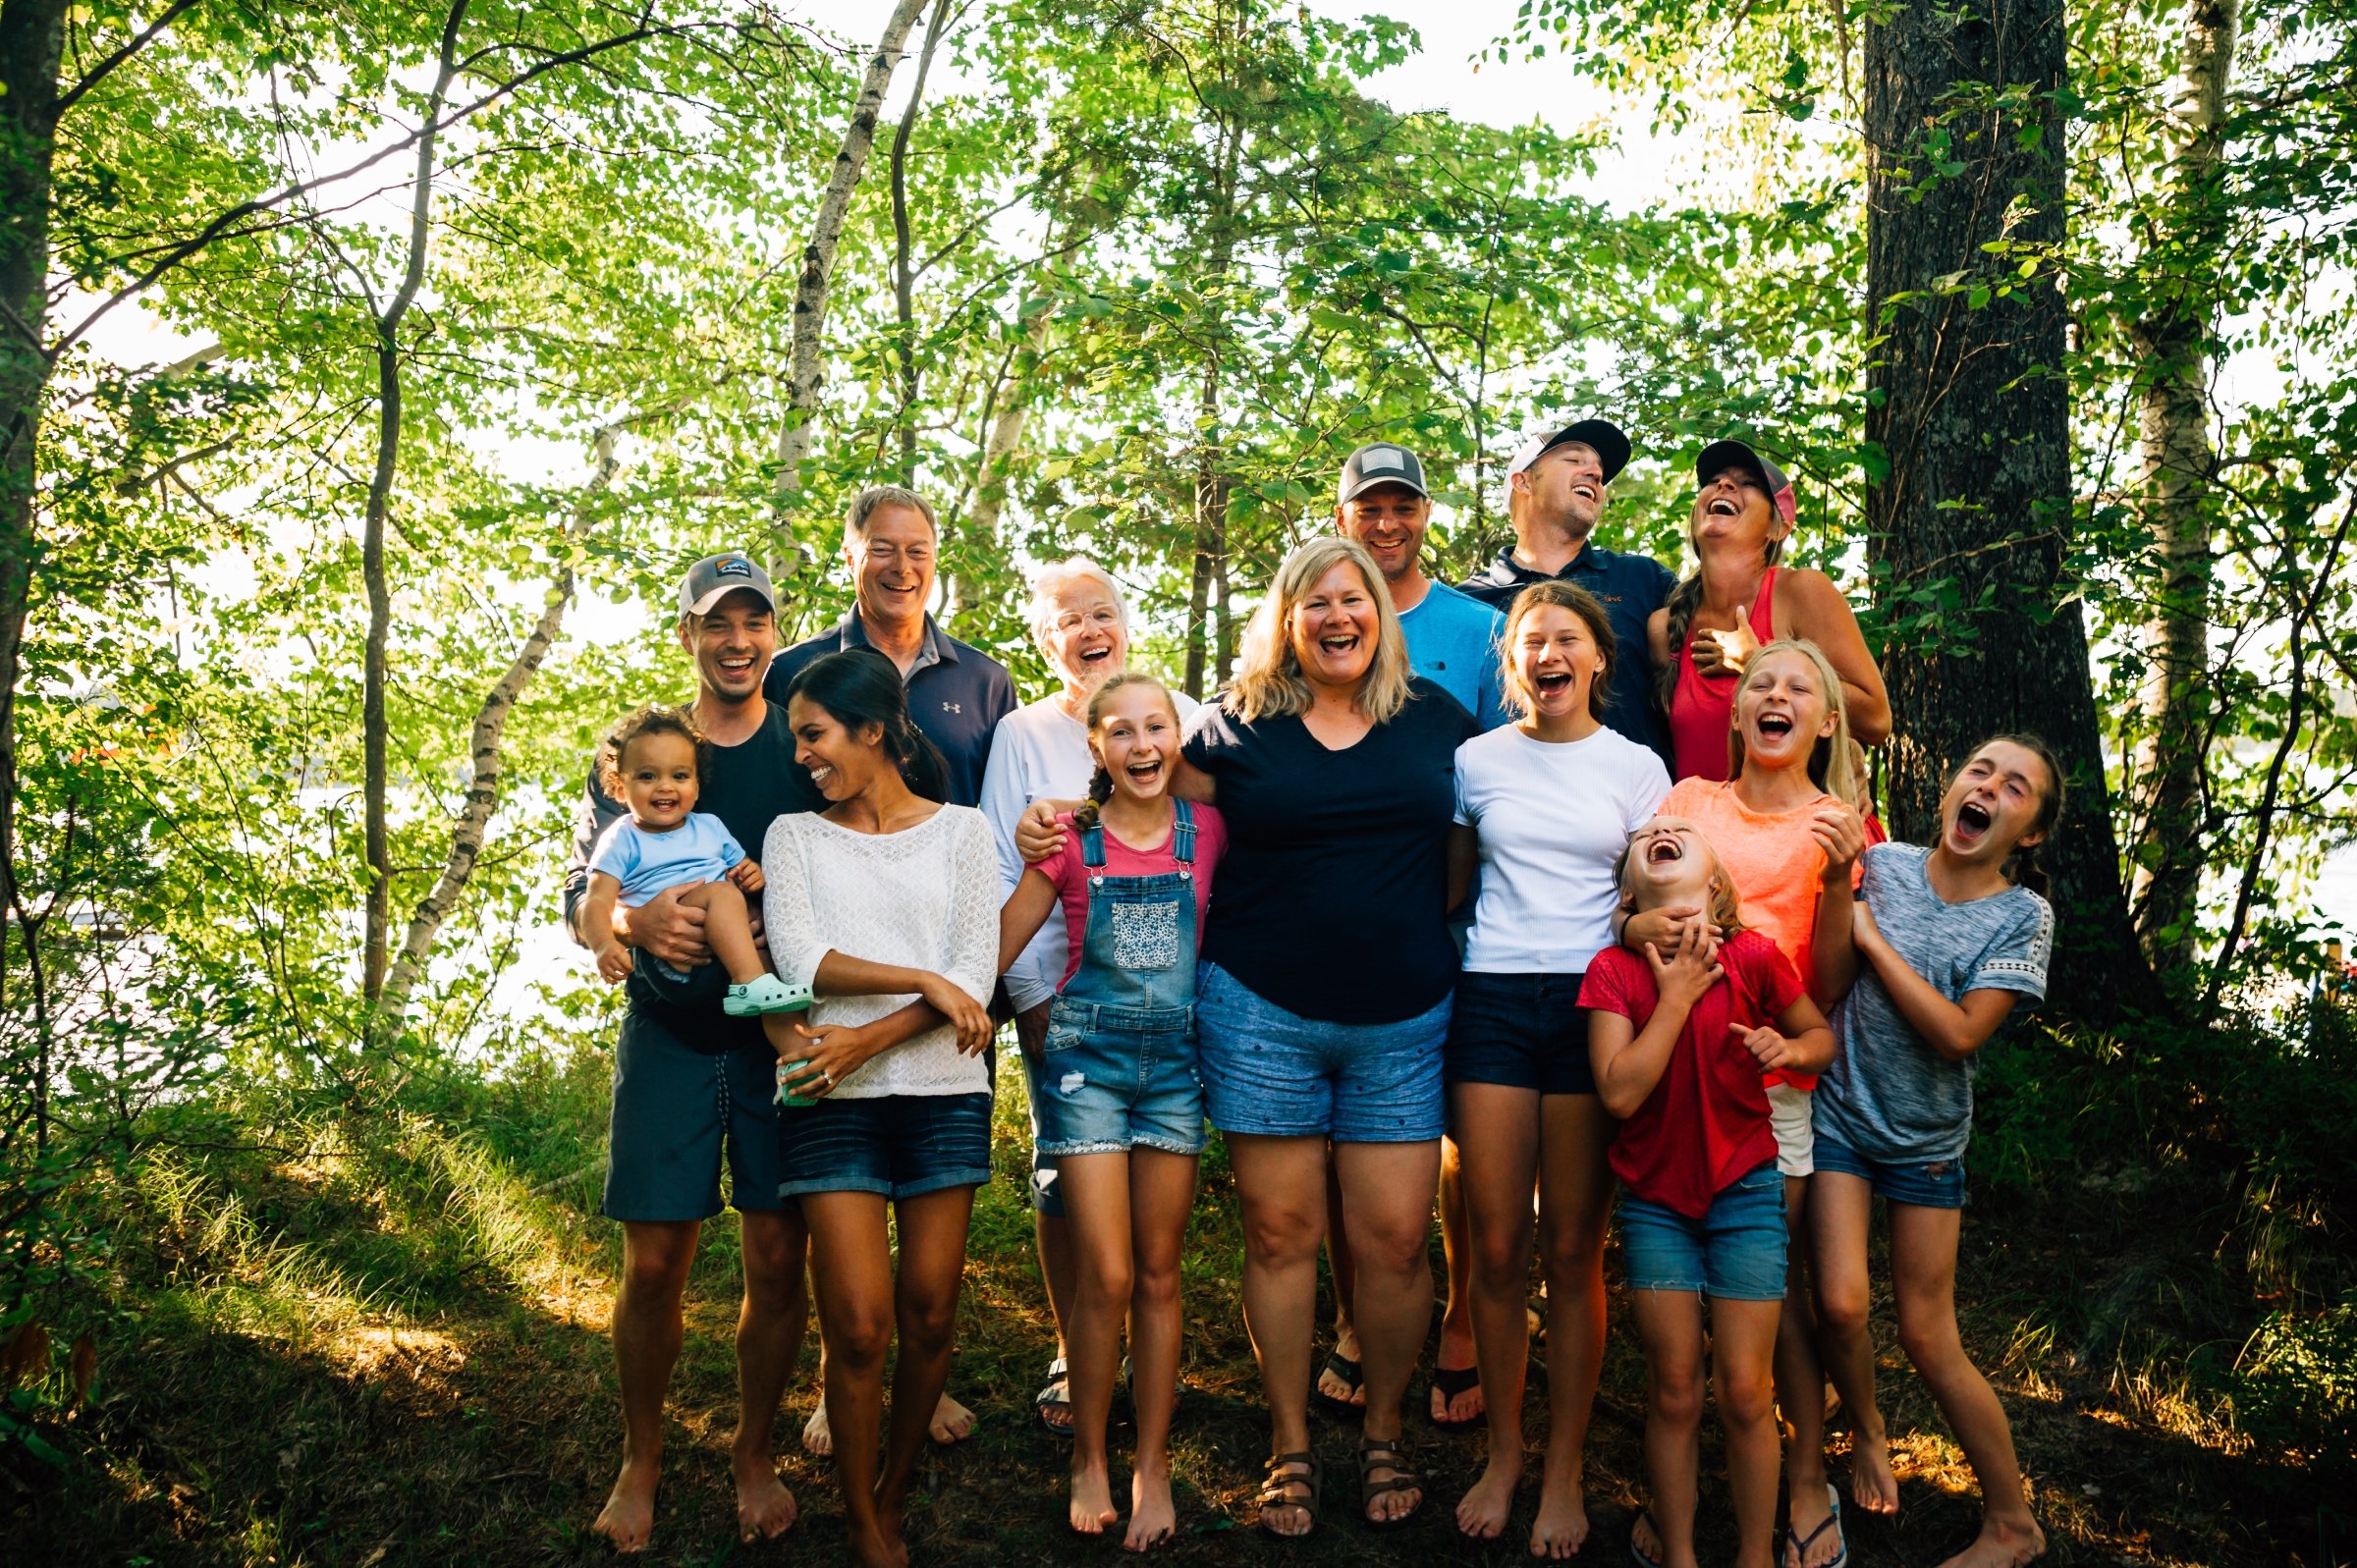 extended family photo session for mothers day gift idea